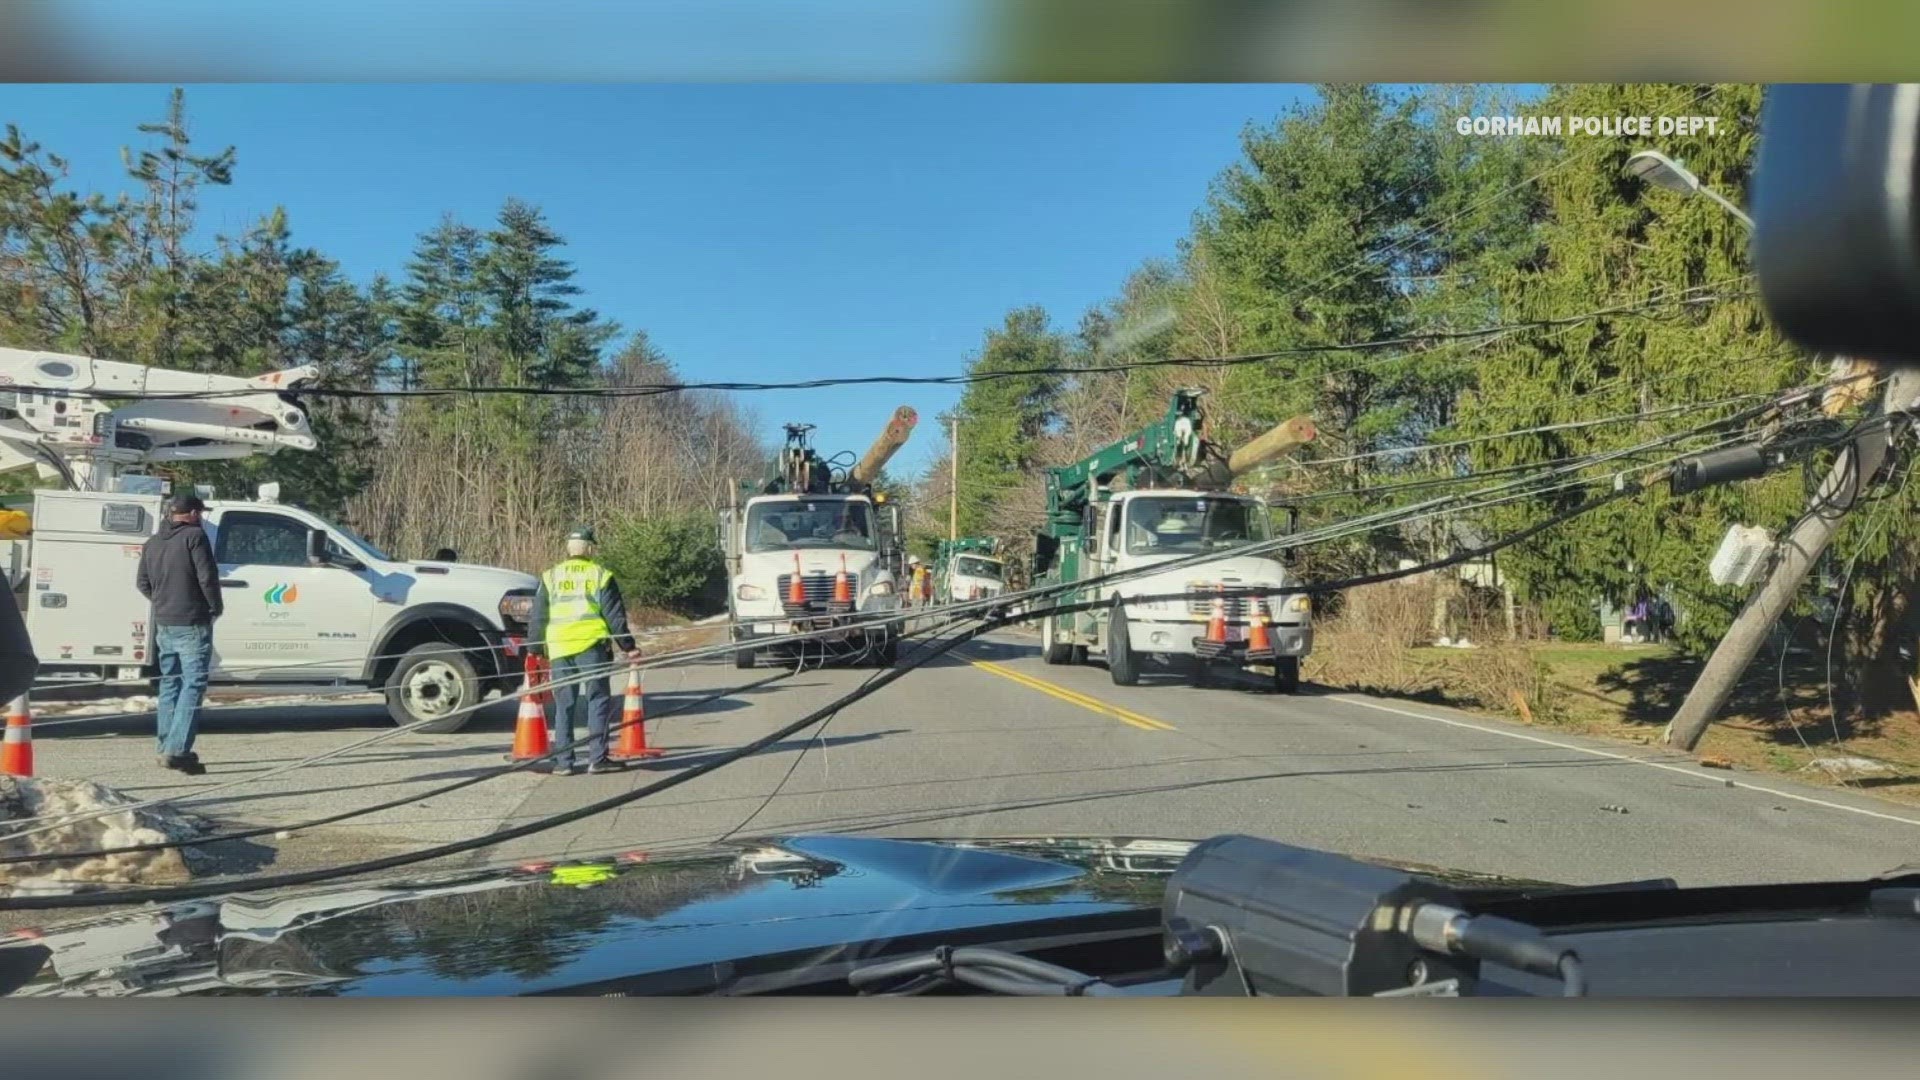 Police said line crews would be working diligently to reopen the road but it likely would not reopen until at least dinner time due to downed phone and power lines.